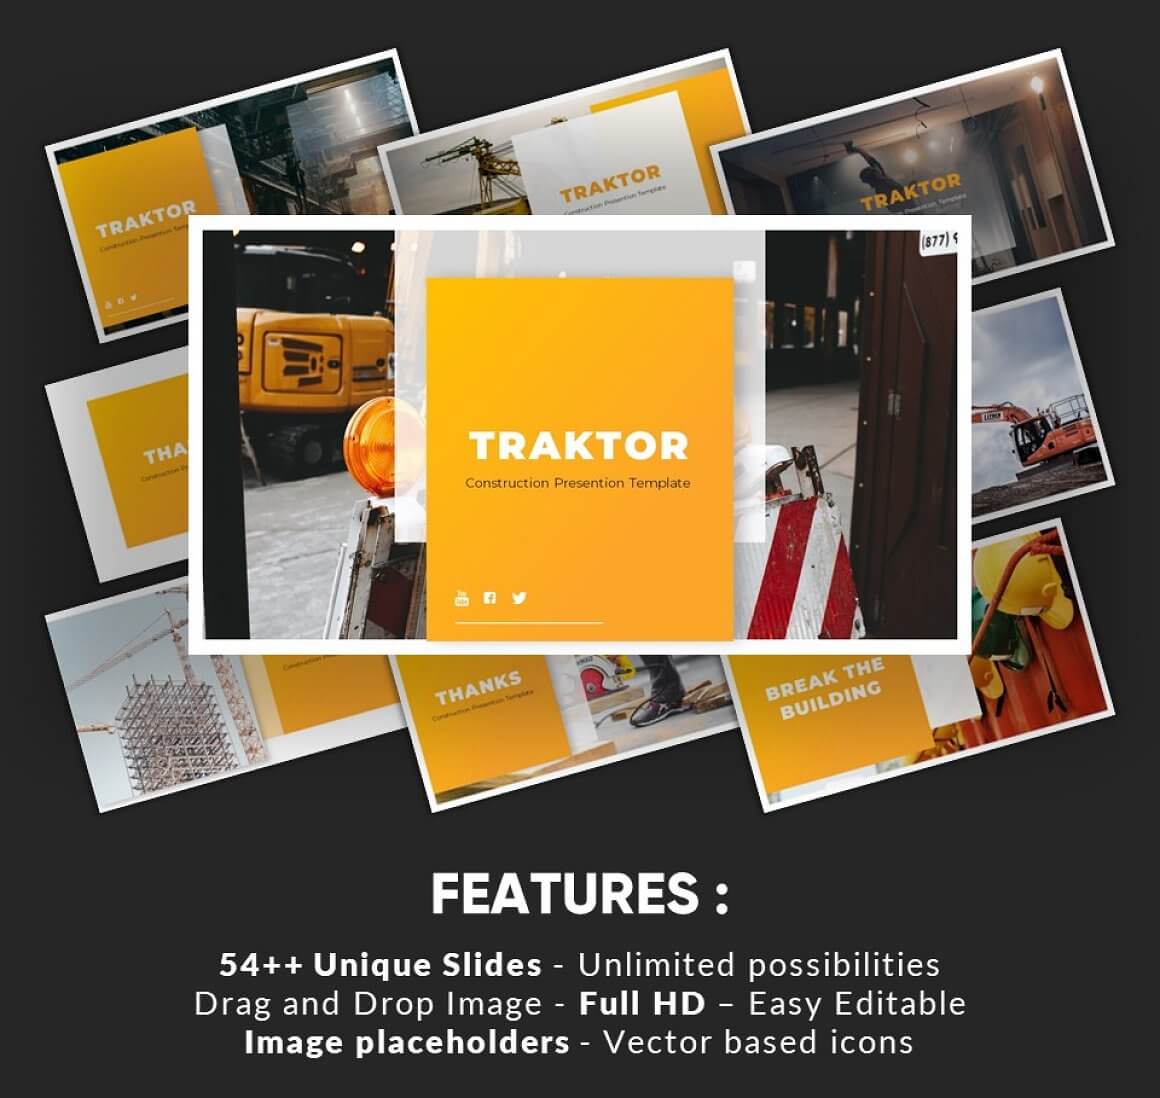 Collections of photo Traktor Construction PowerPoint slides.